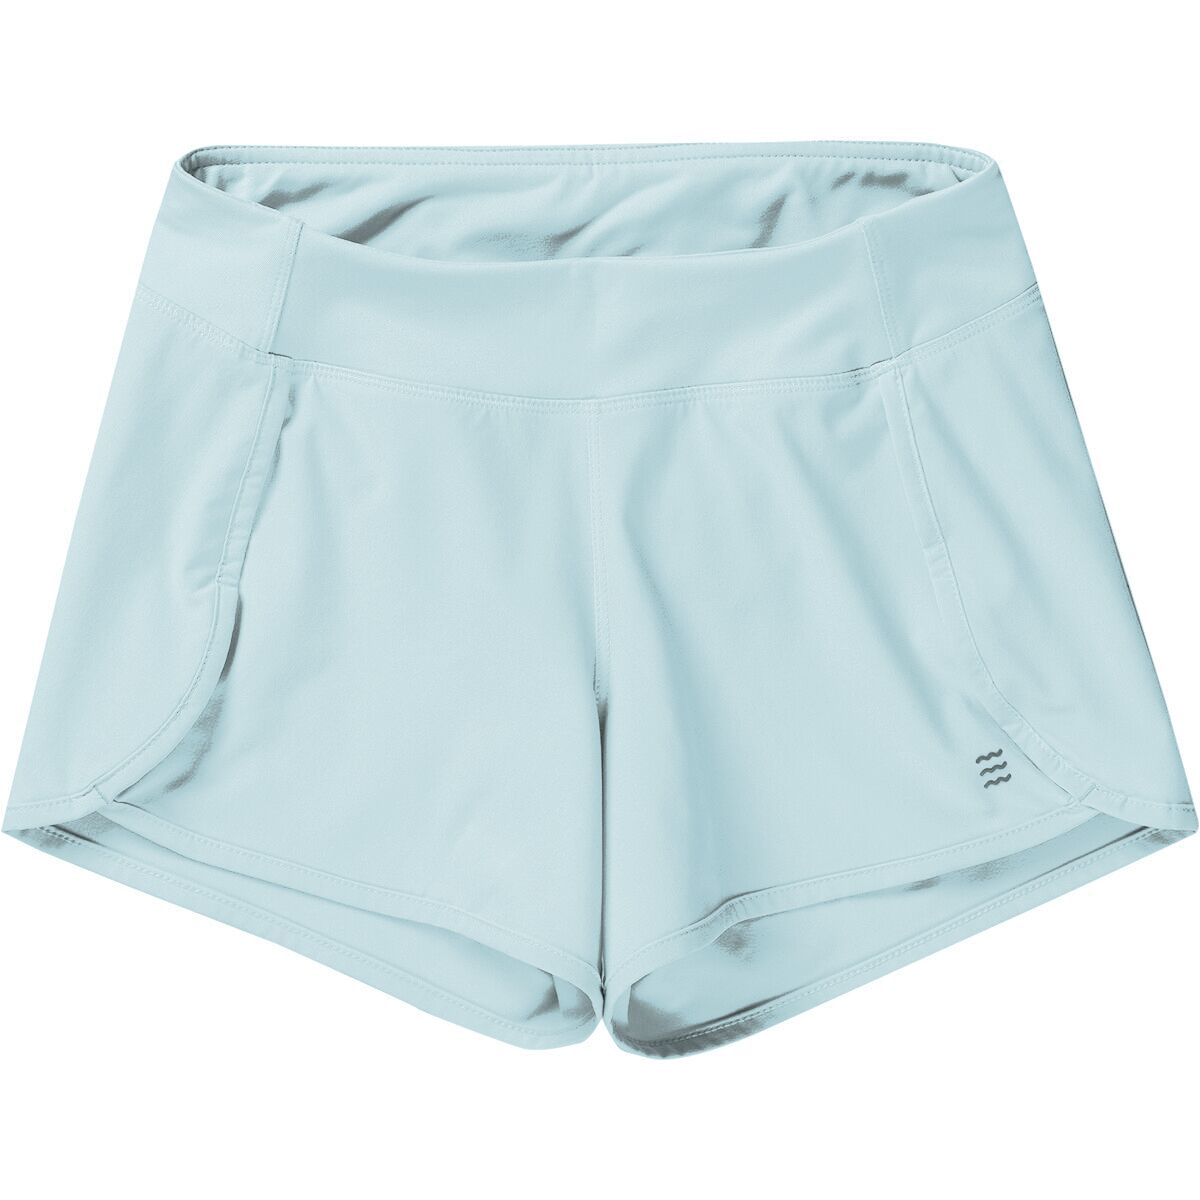 Free Fly Breeze Lined Short - Girls'